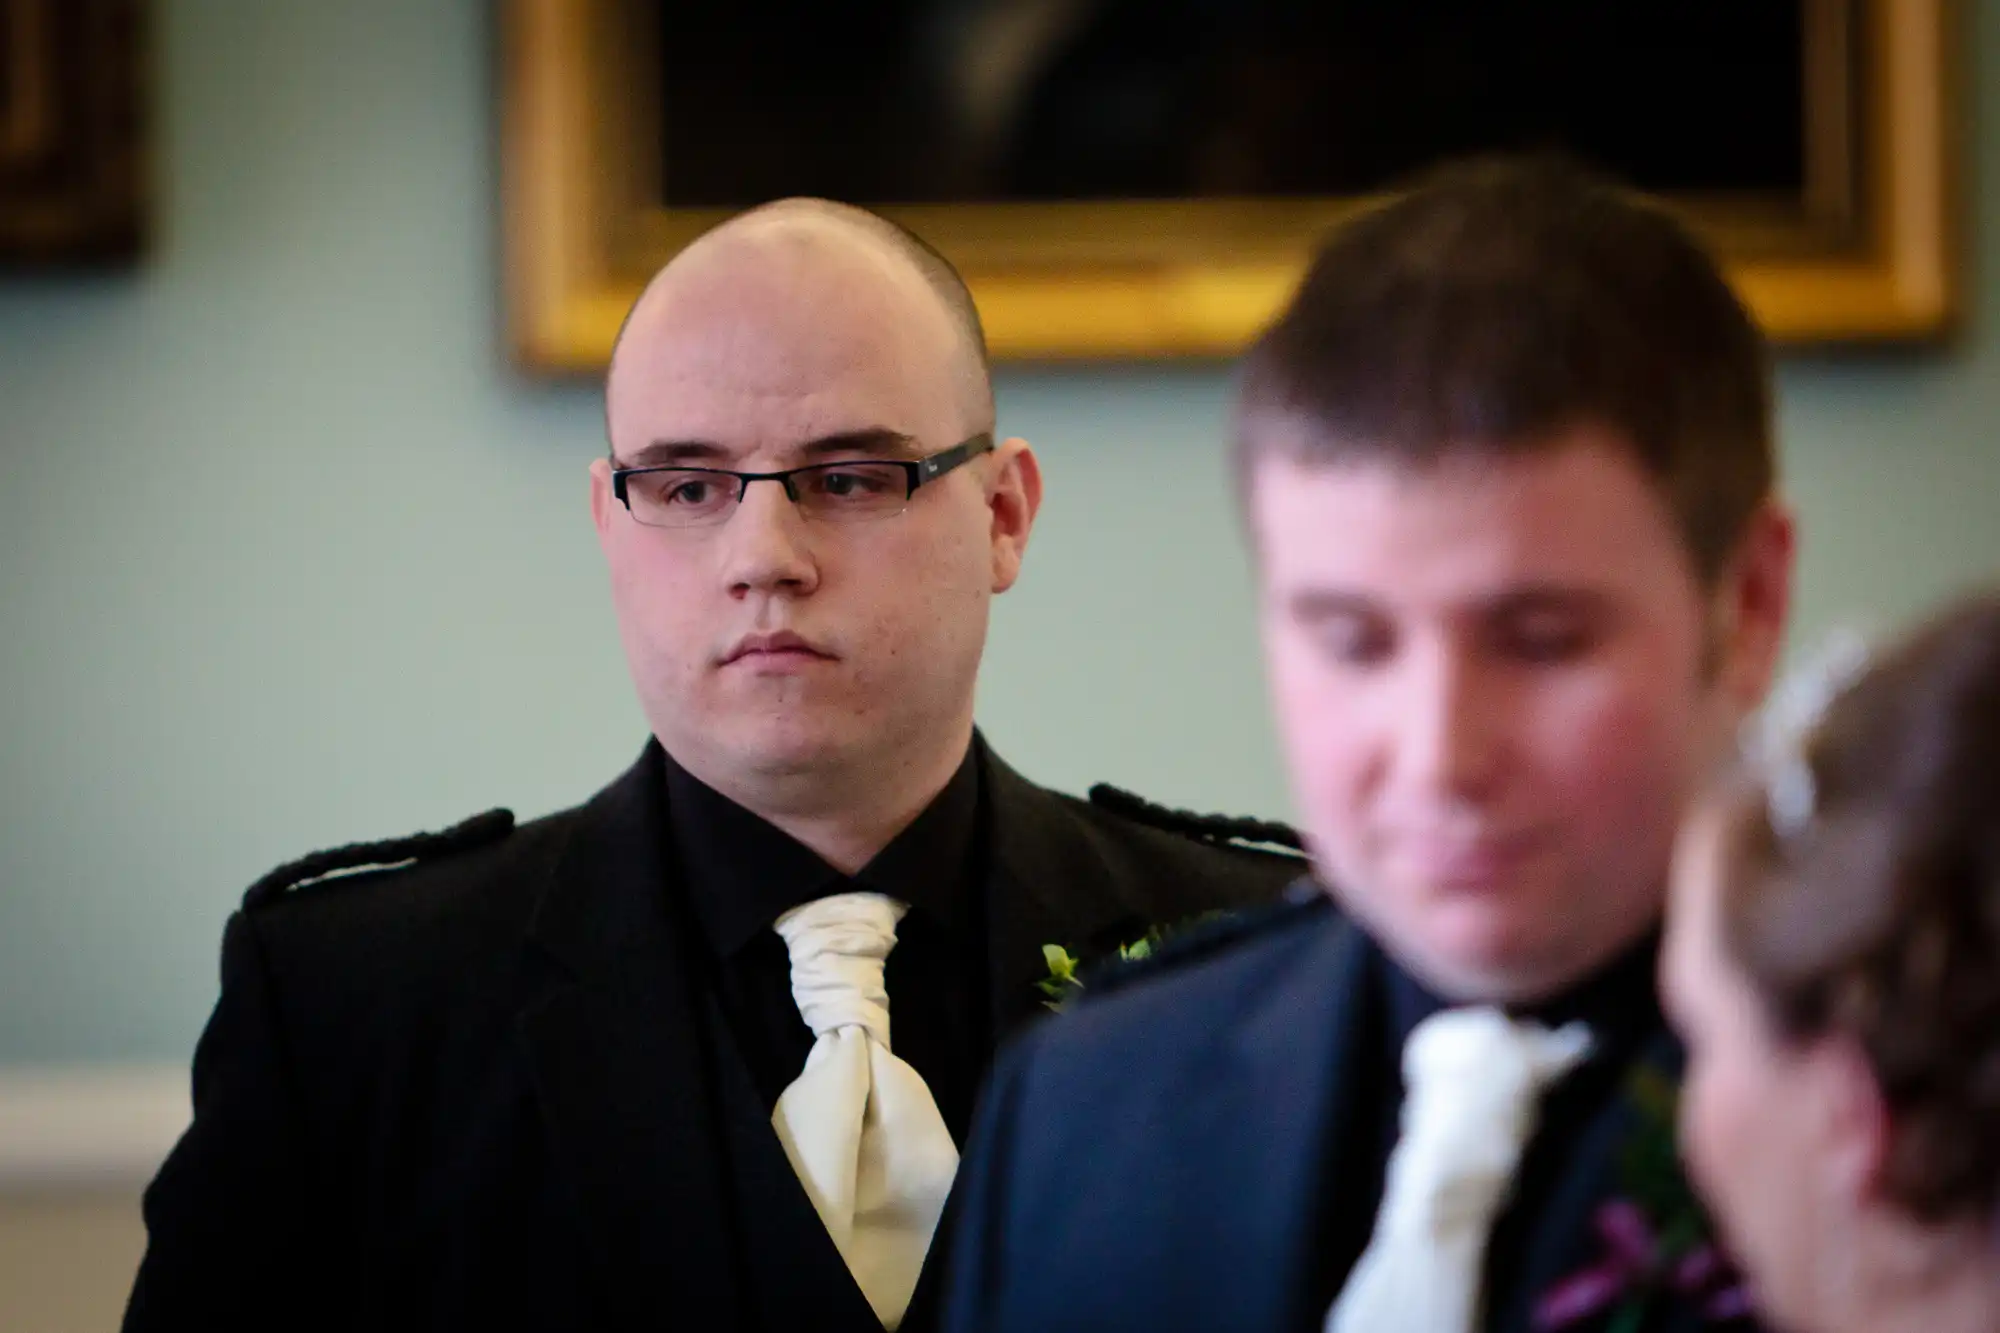 Bald groomsman in black suit and white tie, looking seriously at a wedding, with blurred bride and groom in the foreground.